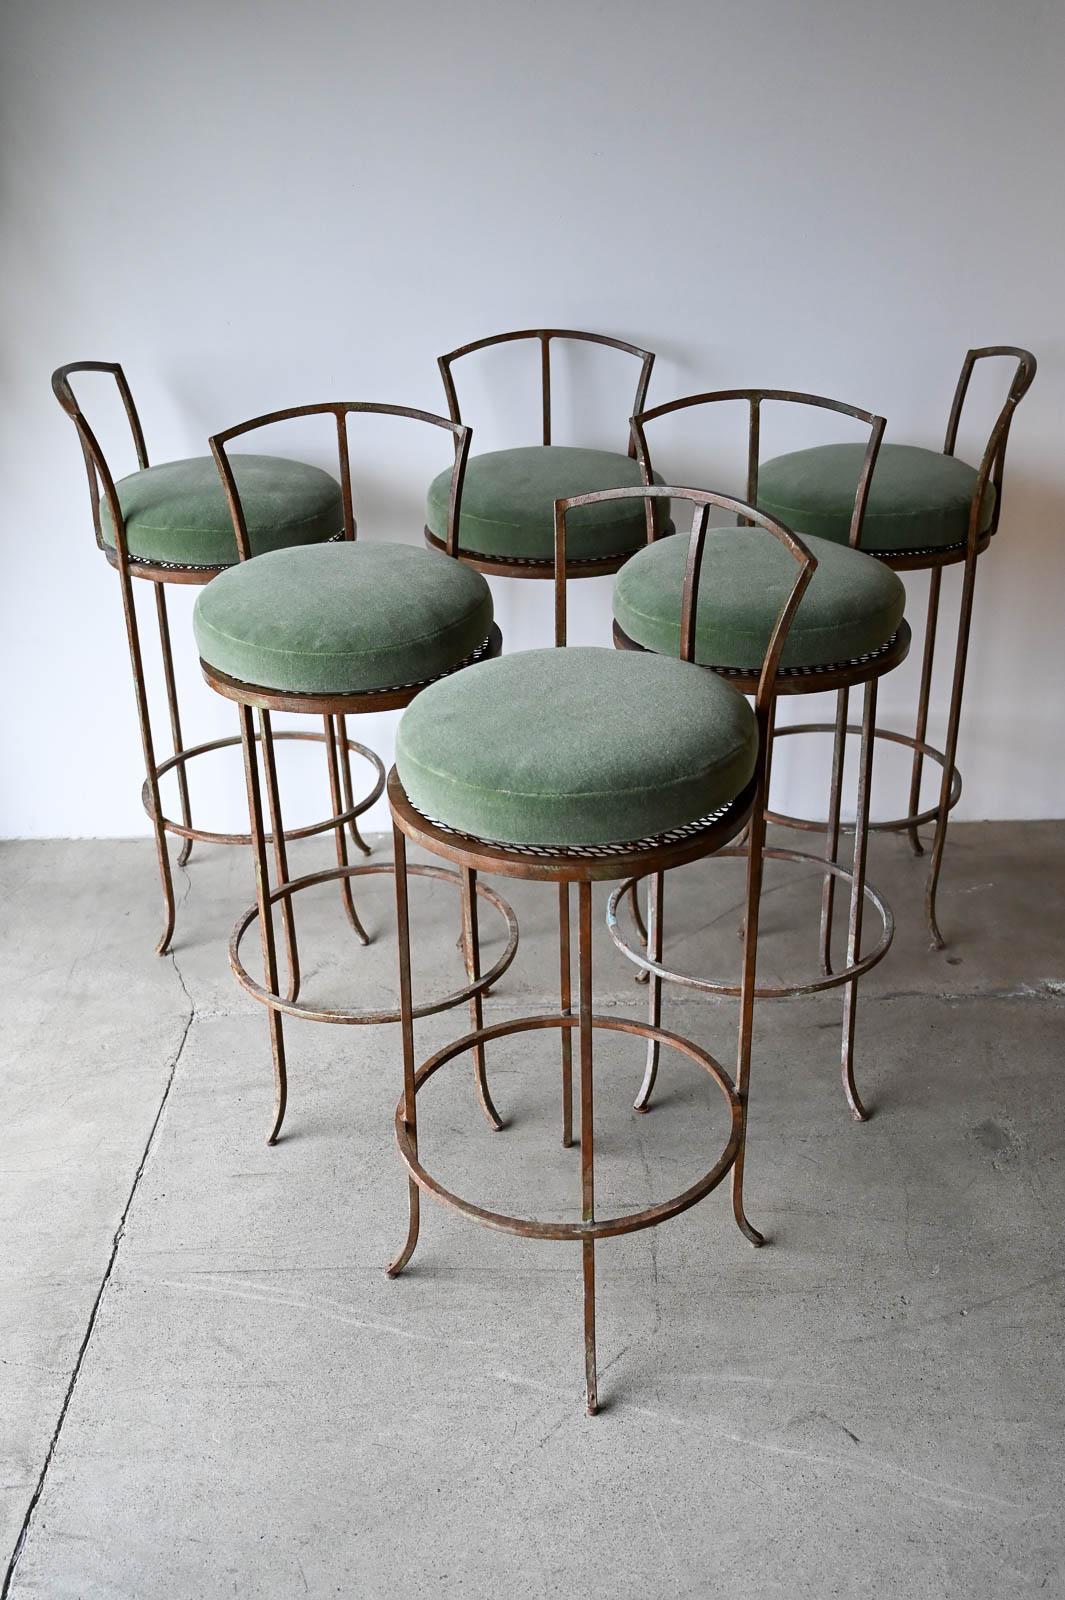 Set of 6 Vintage Iron and Mohair Barstools.  Beautifully designed with expanded metal seats and newly upholstered cushions in green mohair.  Self-leveling feet and sturdy frames.  These are Bar Height, seat measures 30